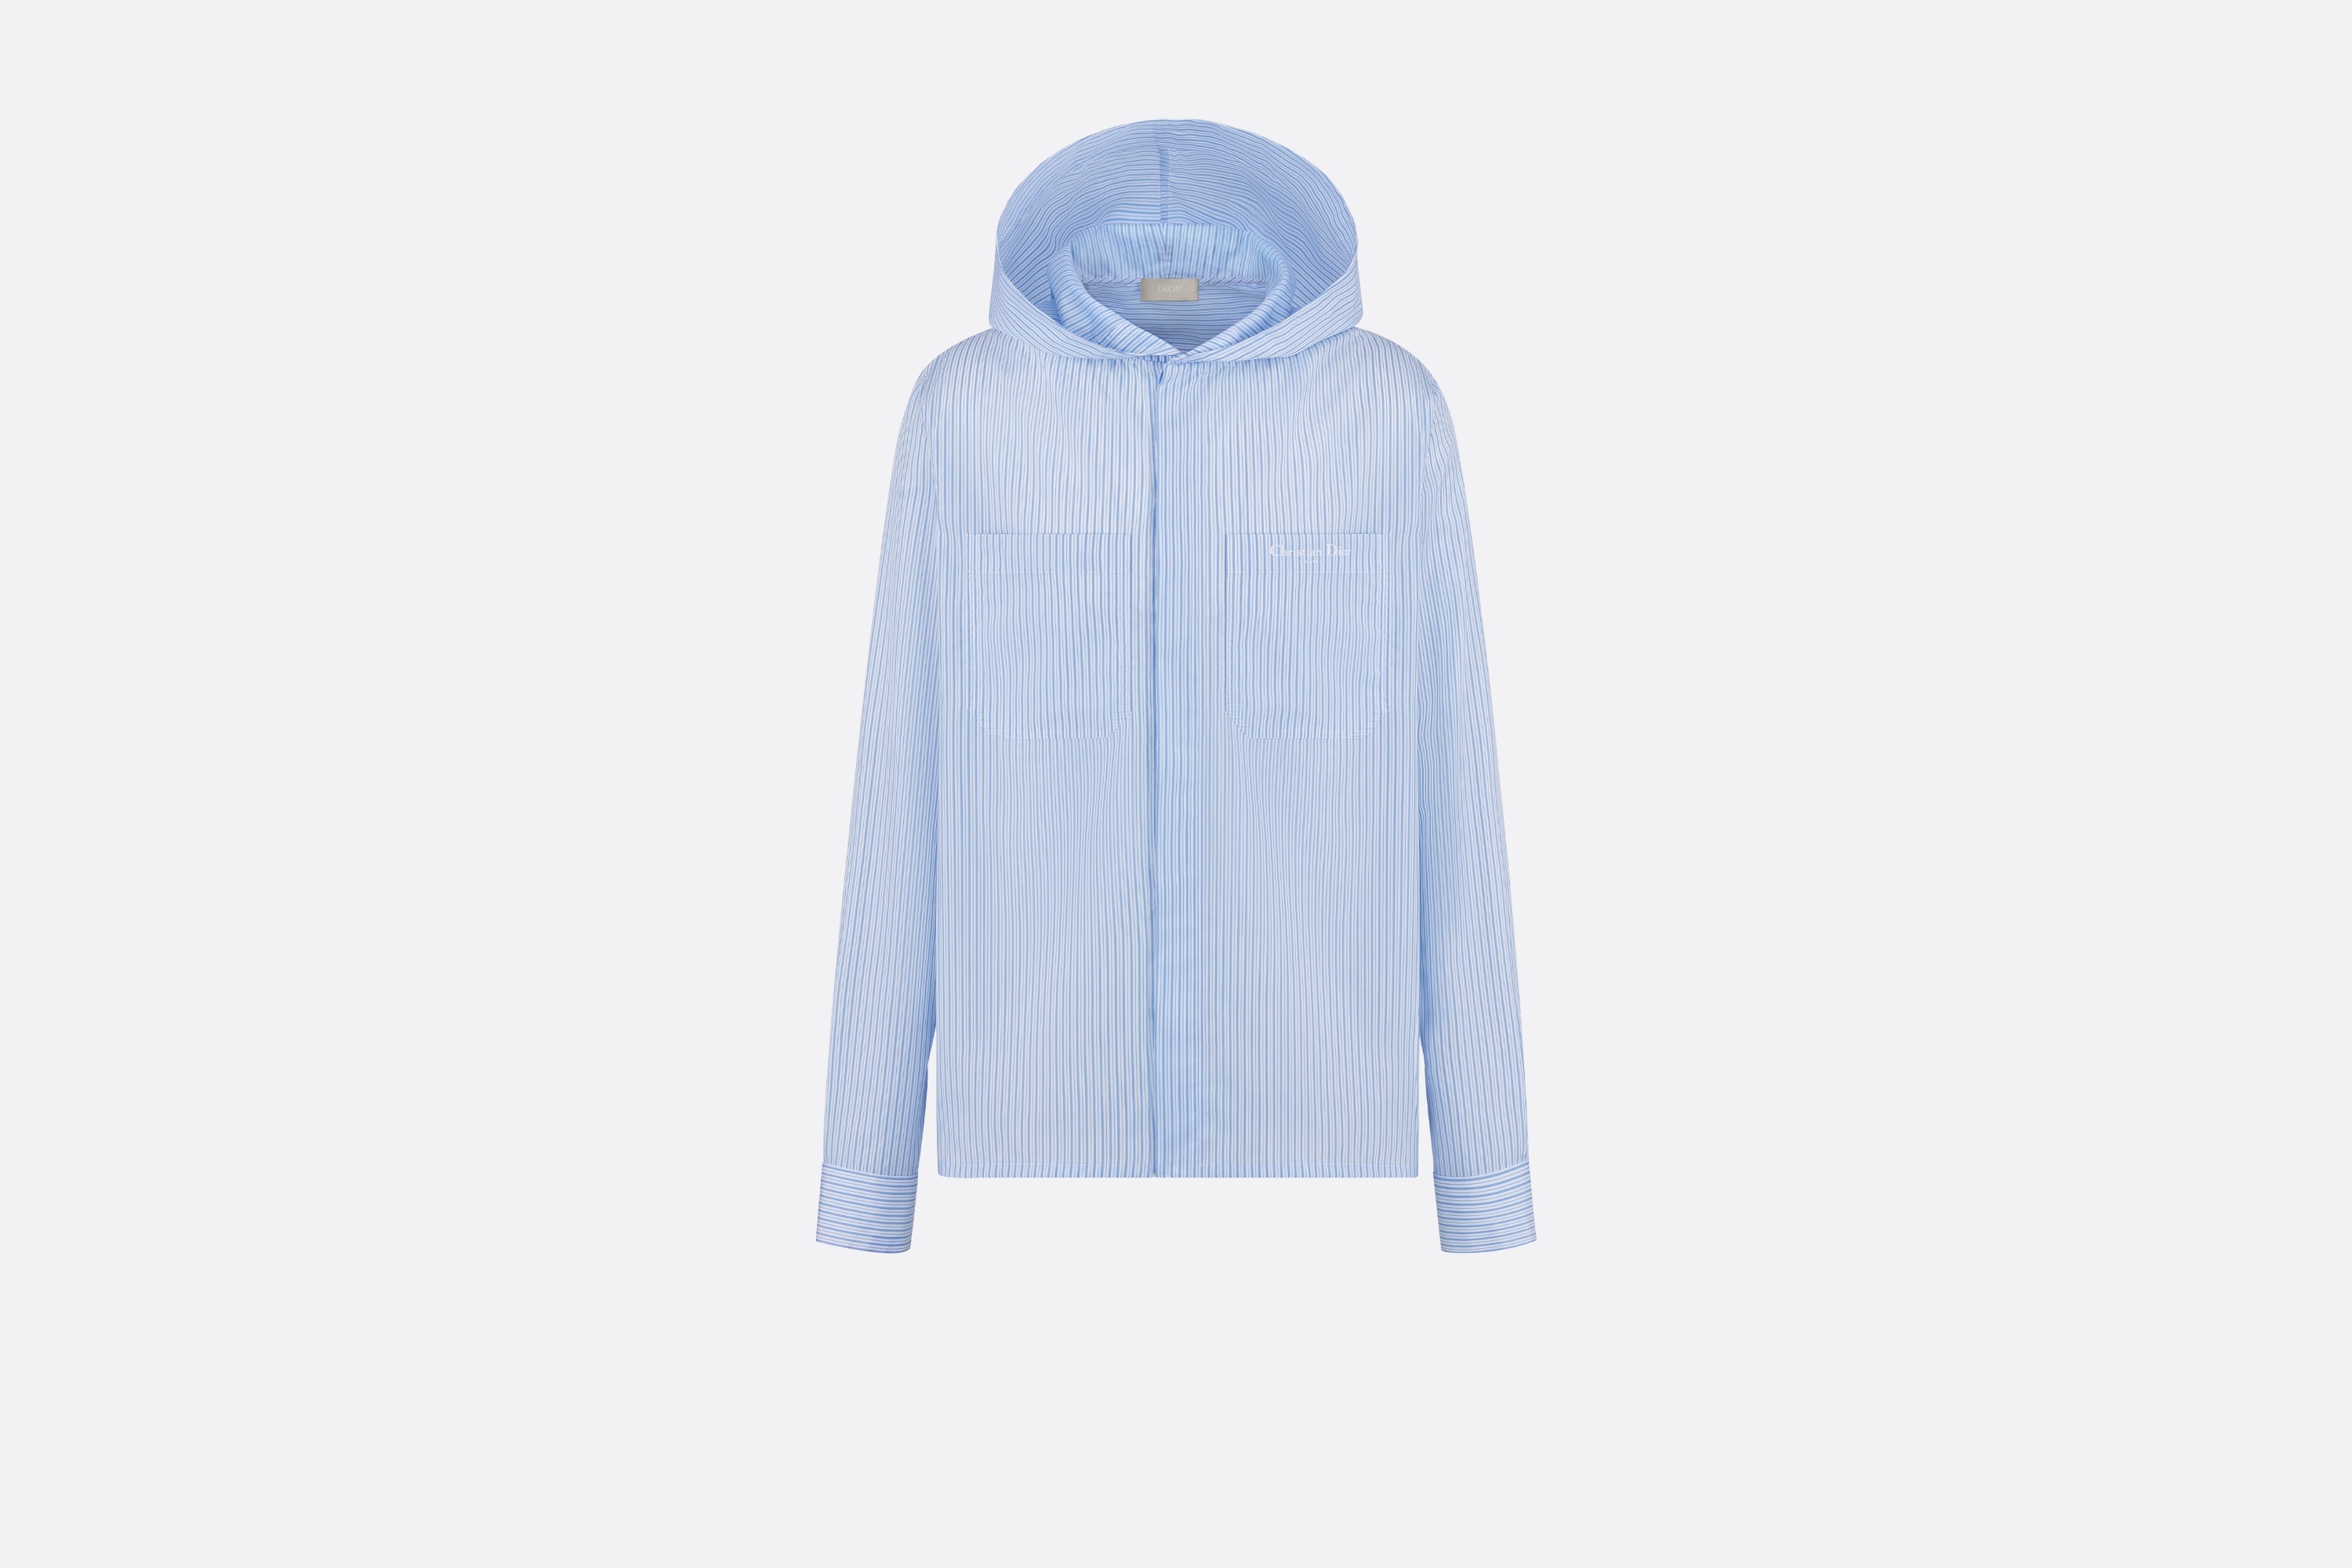 Christian Dior Couture Hooded Shirt - 1